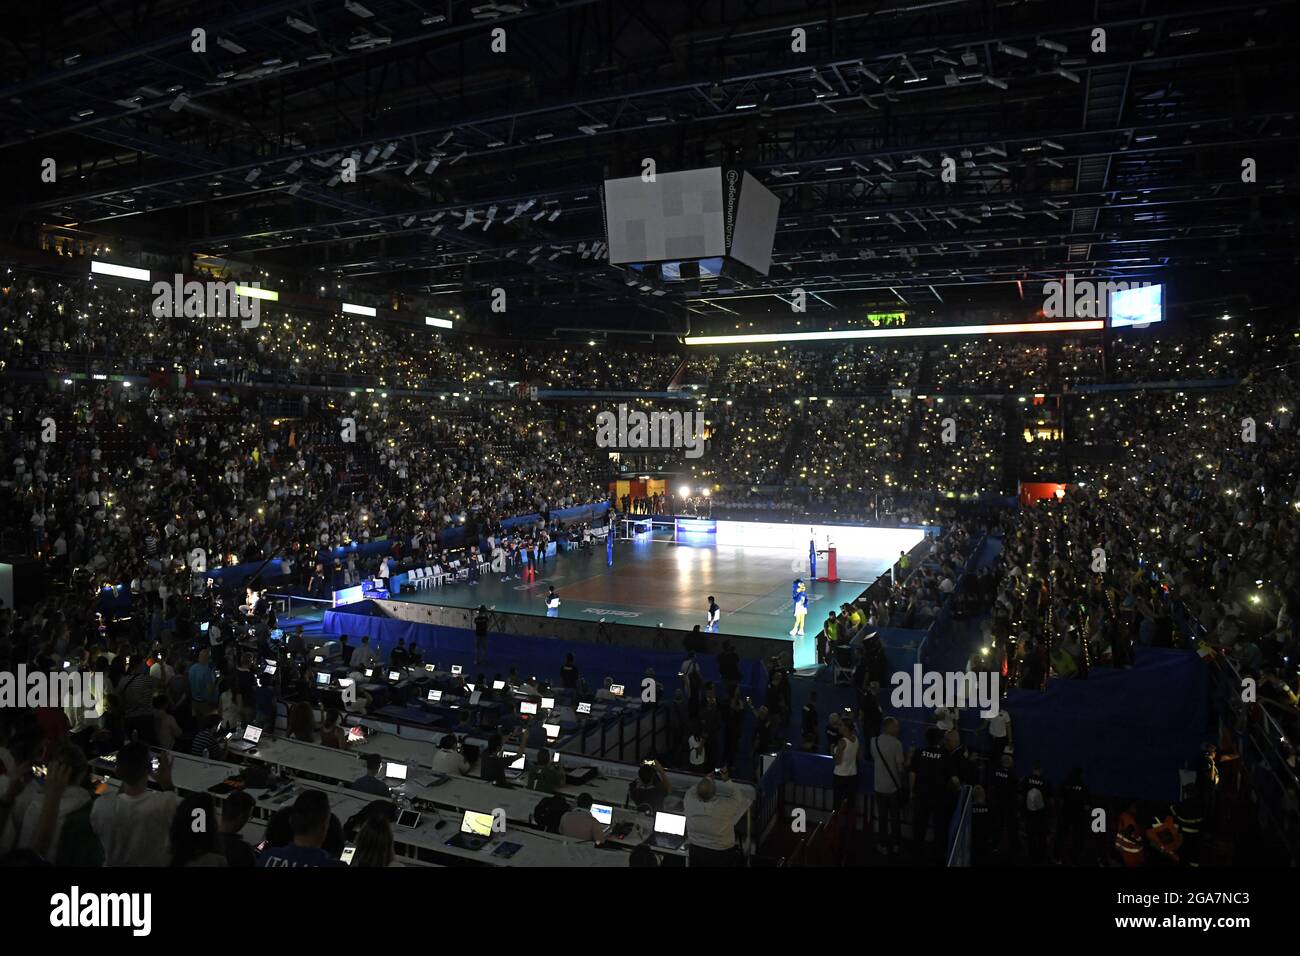 Panoramic top view of the indoor volleyball court during the international Volley Nations League, in Milan. Stock Photo